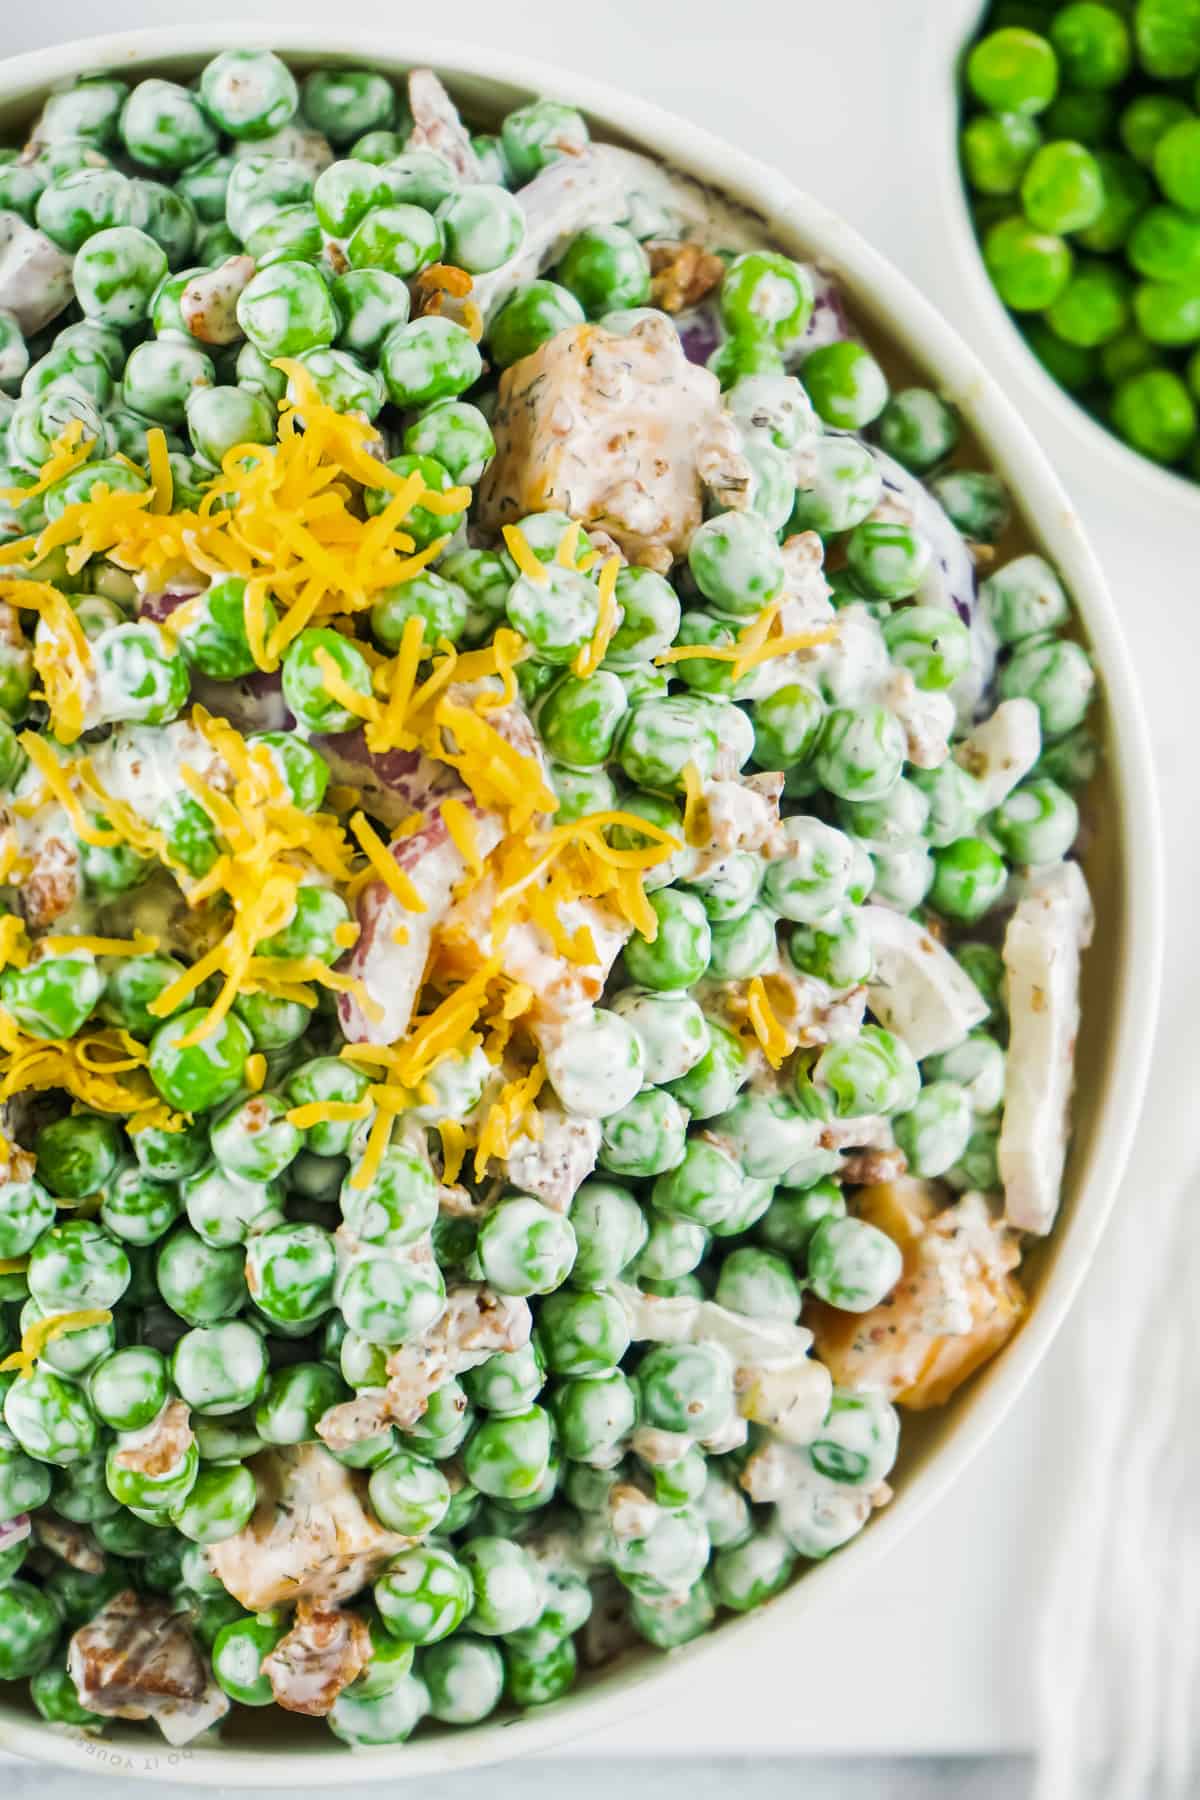 Pea Salad with cheese on top